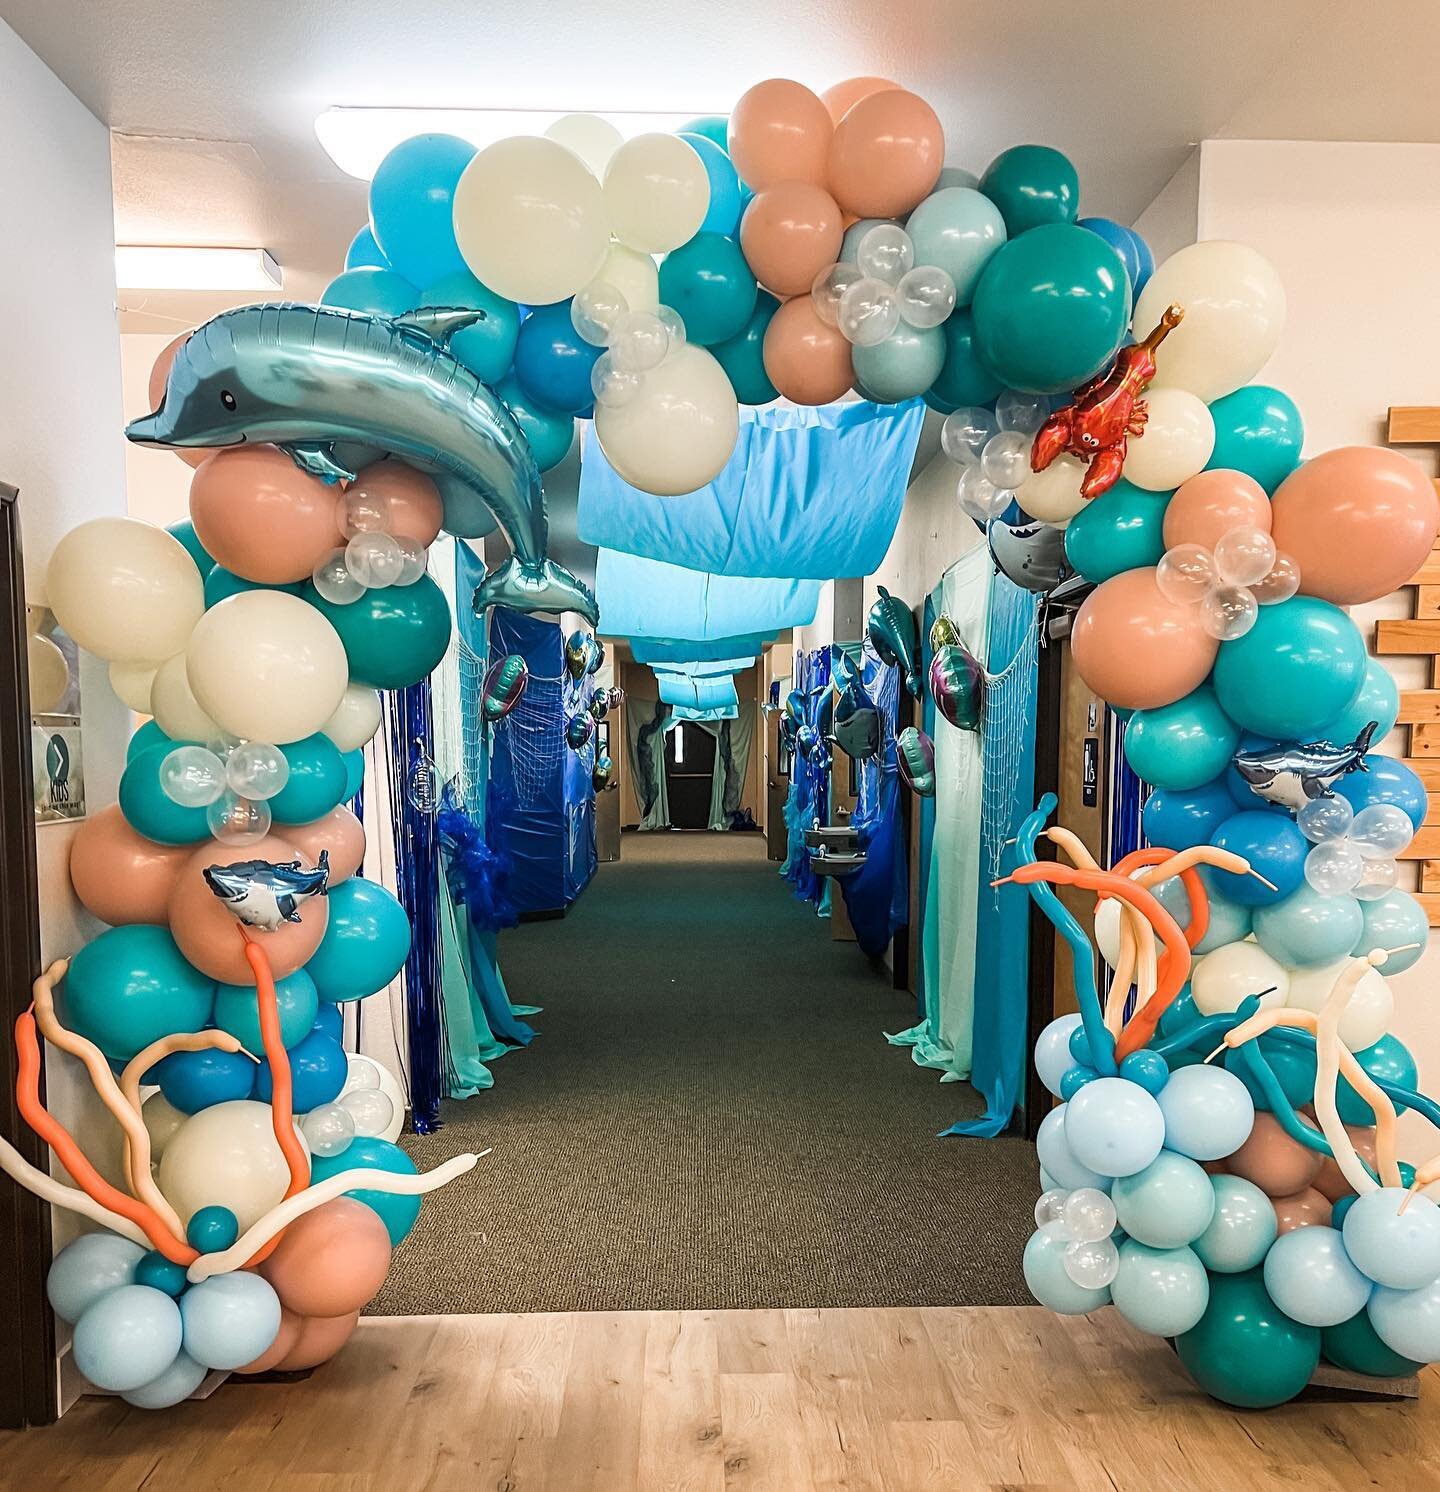 We love when VBS chooses the perfect theme. So happy with some of these balloon creations 🤍🌊